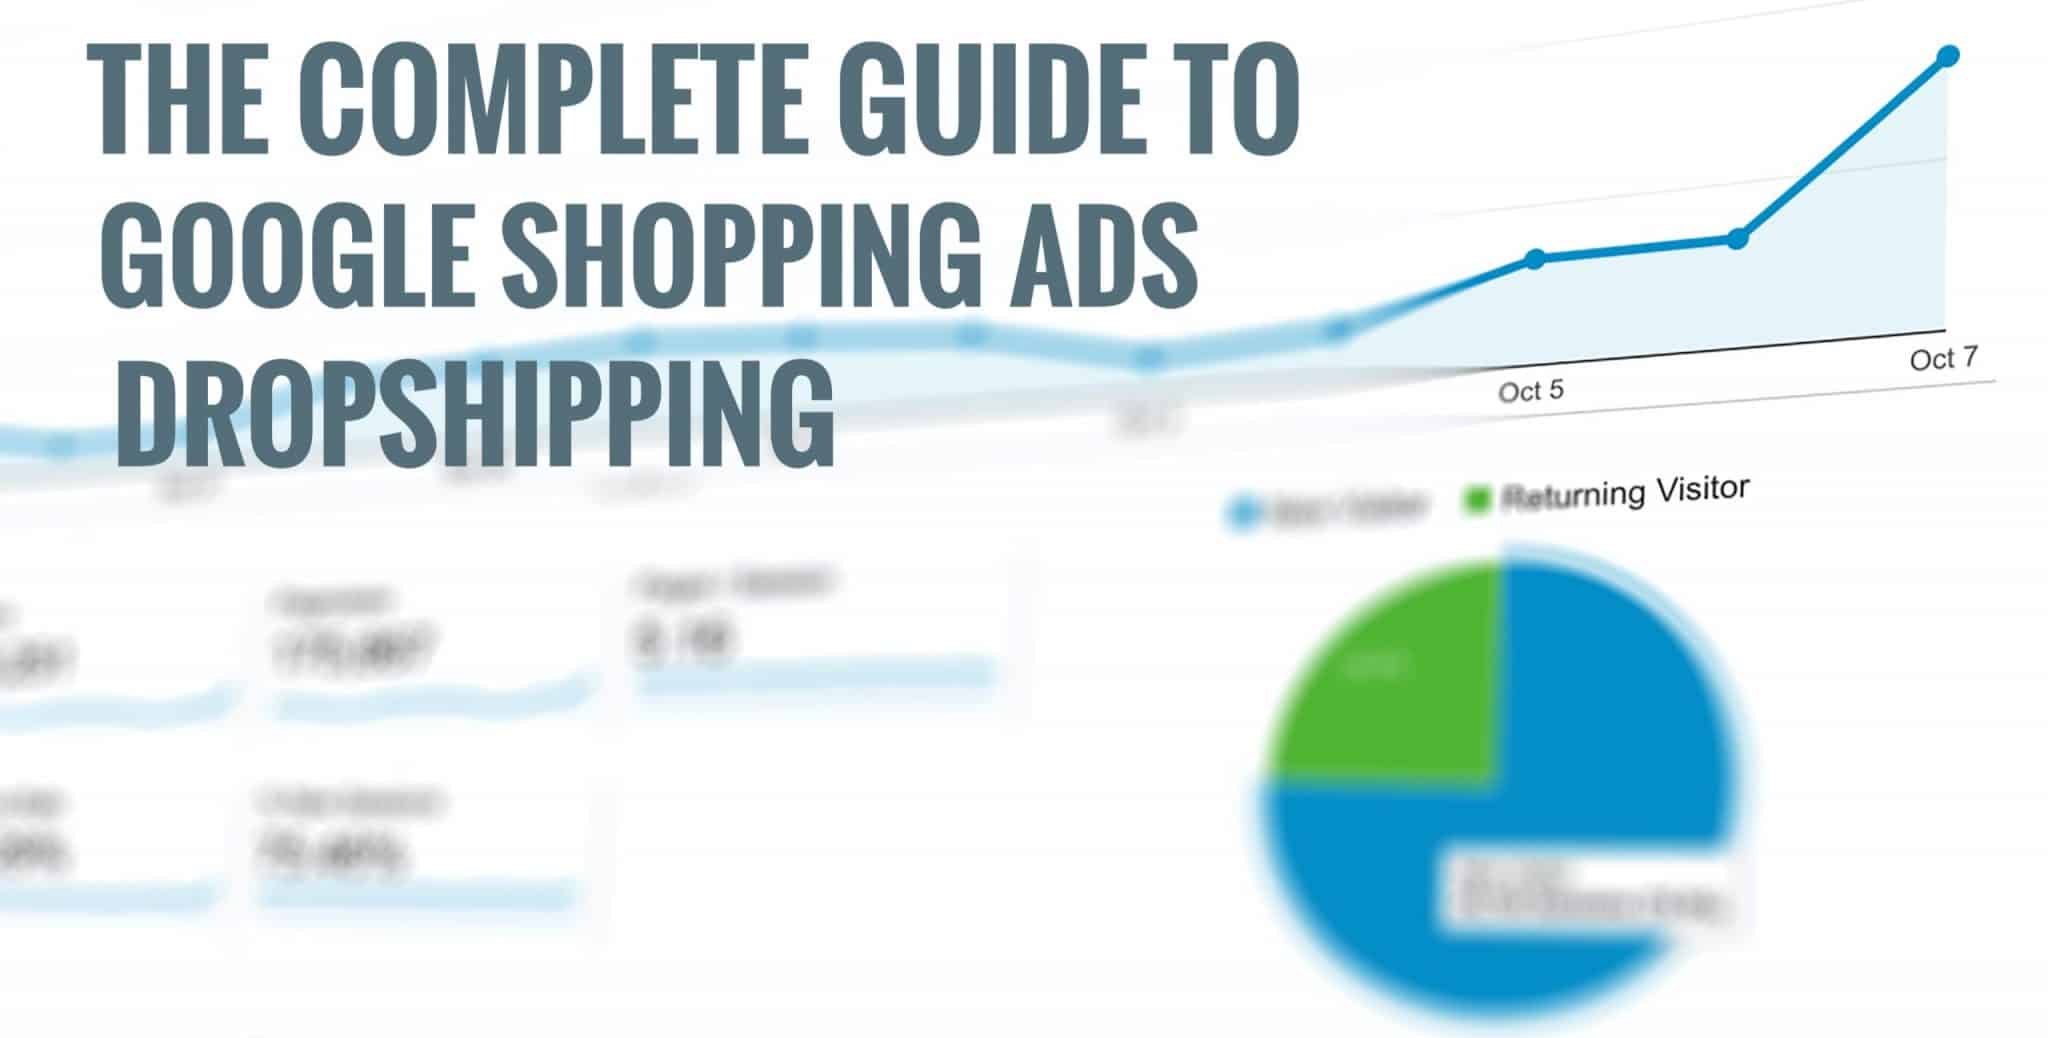 The Complete Guide to Google Shopping Ads Dropshipping